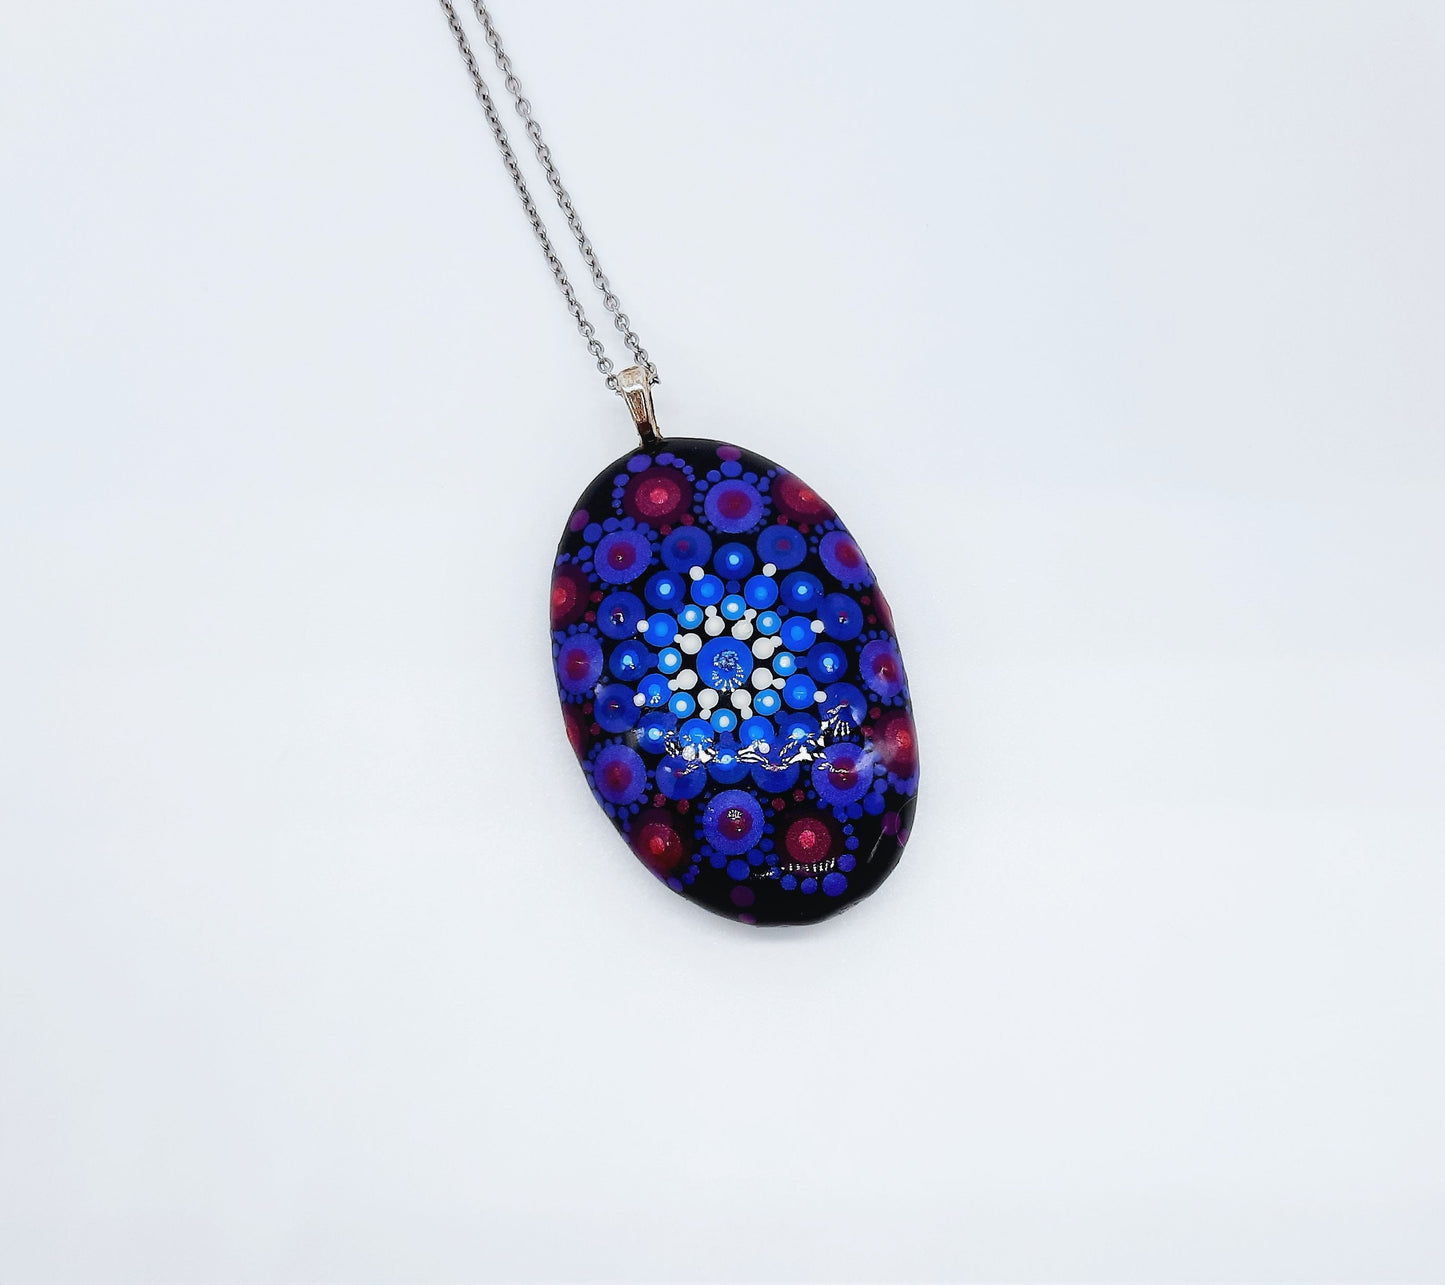 Handpainted Purple / Blue Mandala Necklace, Stone / Rock Pendant, Sealed w Resin, Hypoallergenic Stainless Steel Chain, Lobster Claw Closure